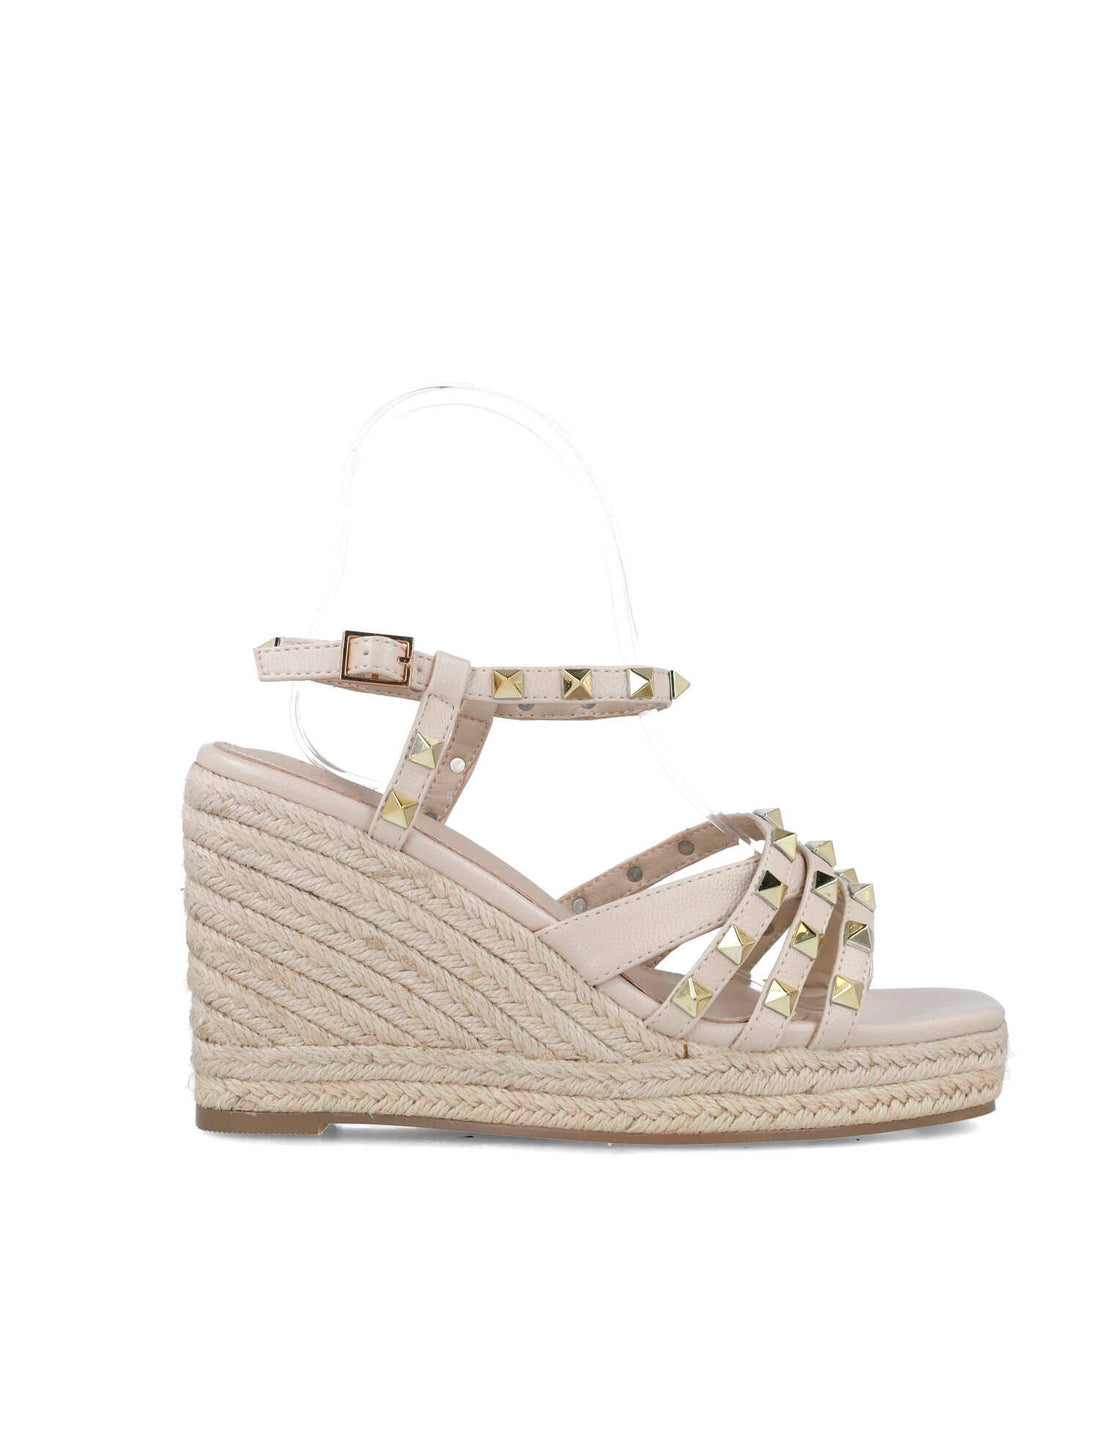 Studded Wedges With Braided Platform_24909_06_01